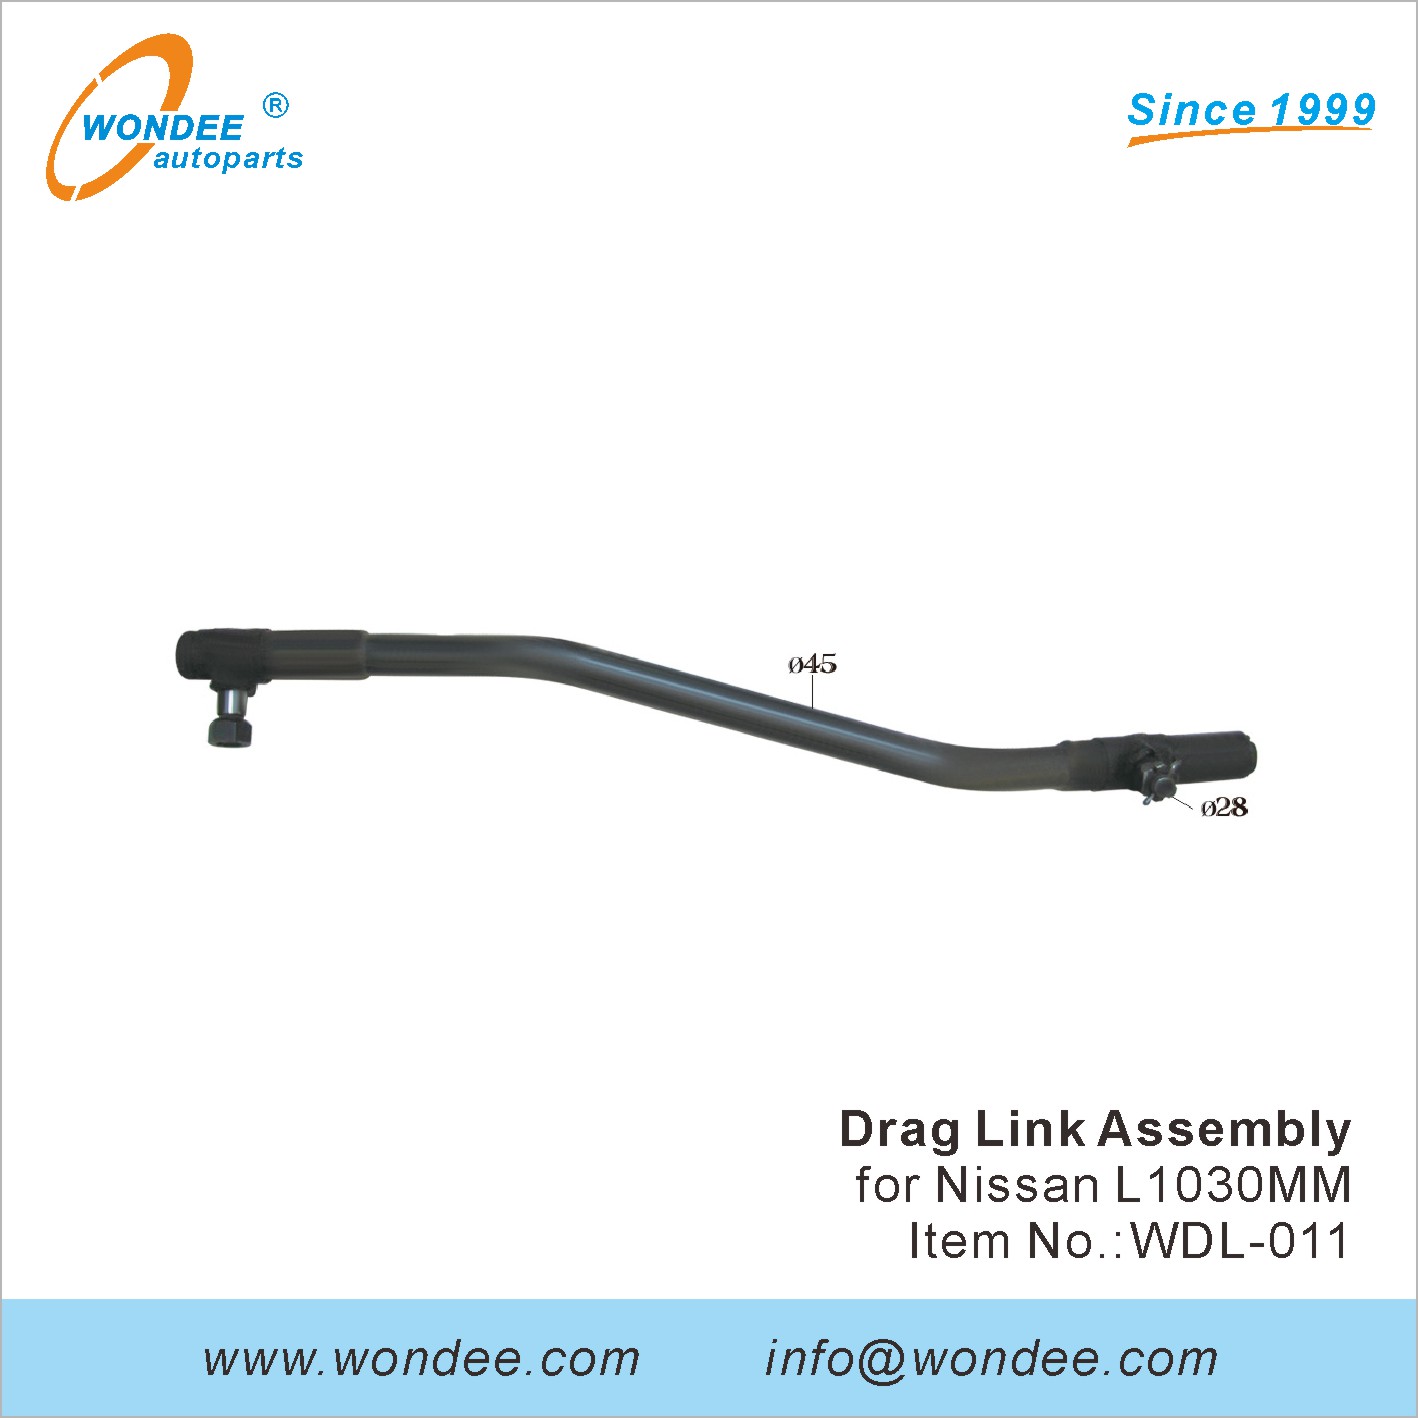 WONDEE drag link assembly (11)